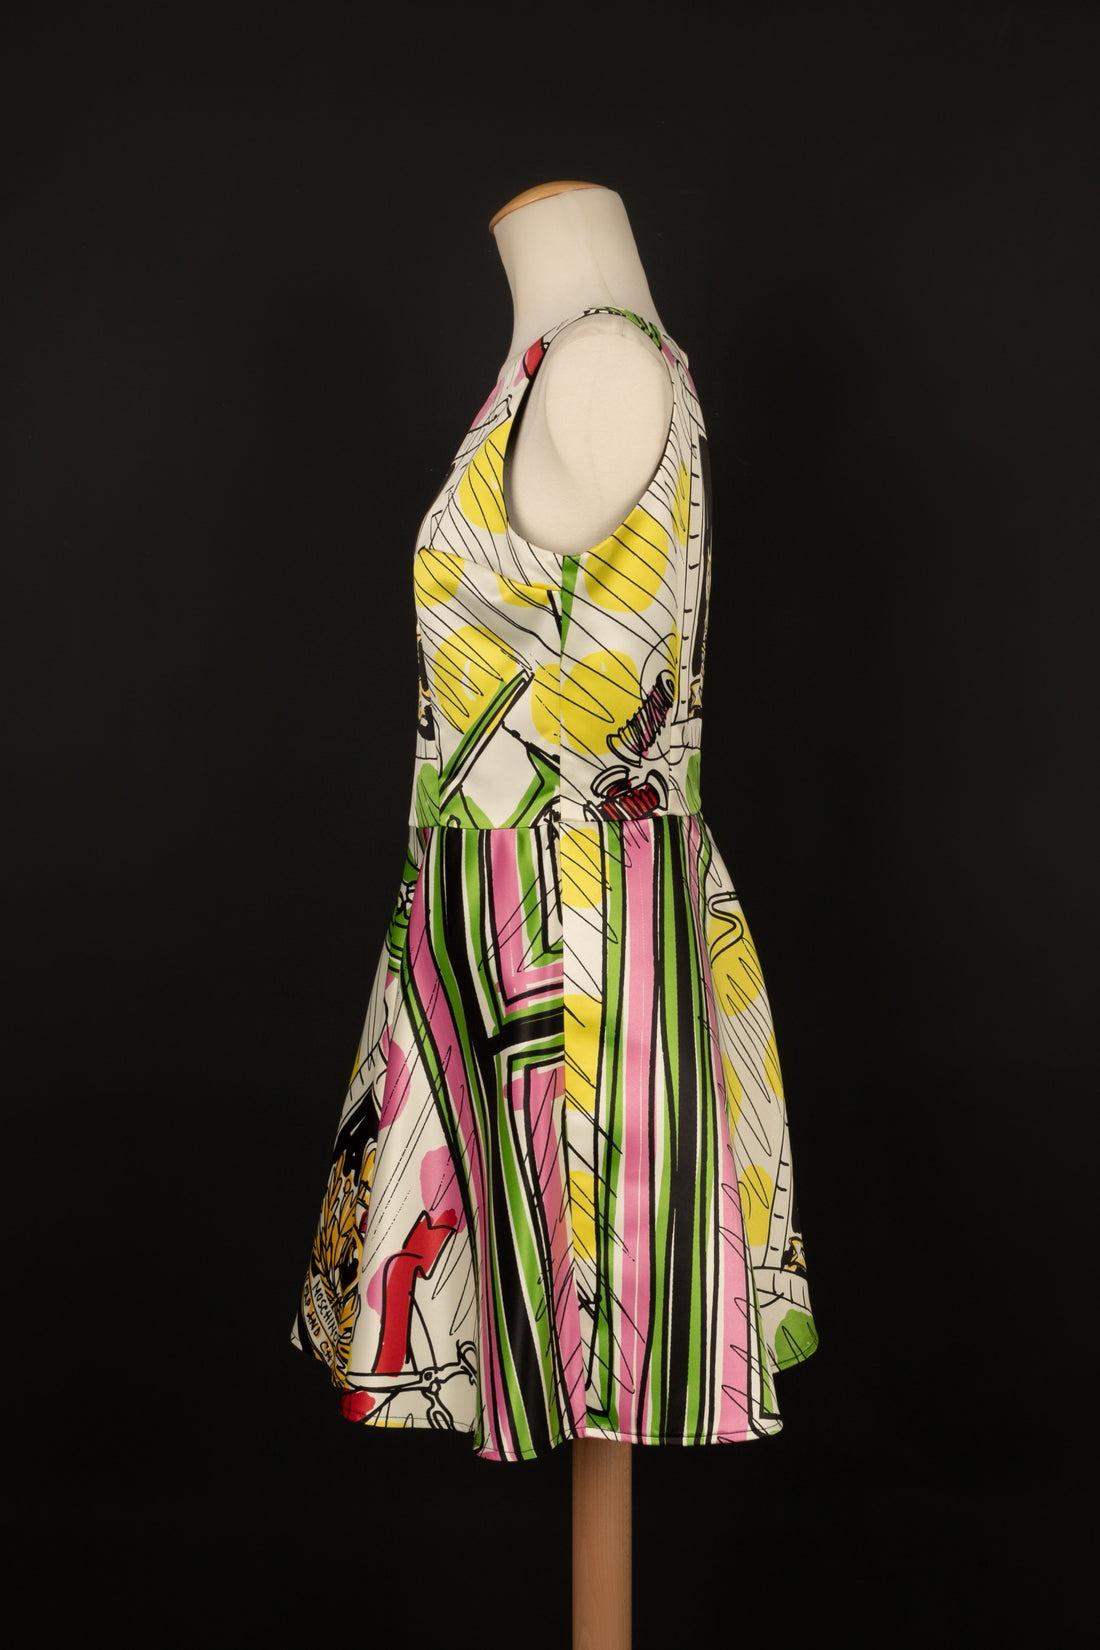 Moschino - Mid-length colorful printed dress. Indicated size 38FR.

Additional information:
Condition: Very good condition
Dimensions: Chest: 46 cm - Waist: 39 cm - Length: 85 cm

Seller Reference: VR216
